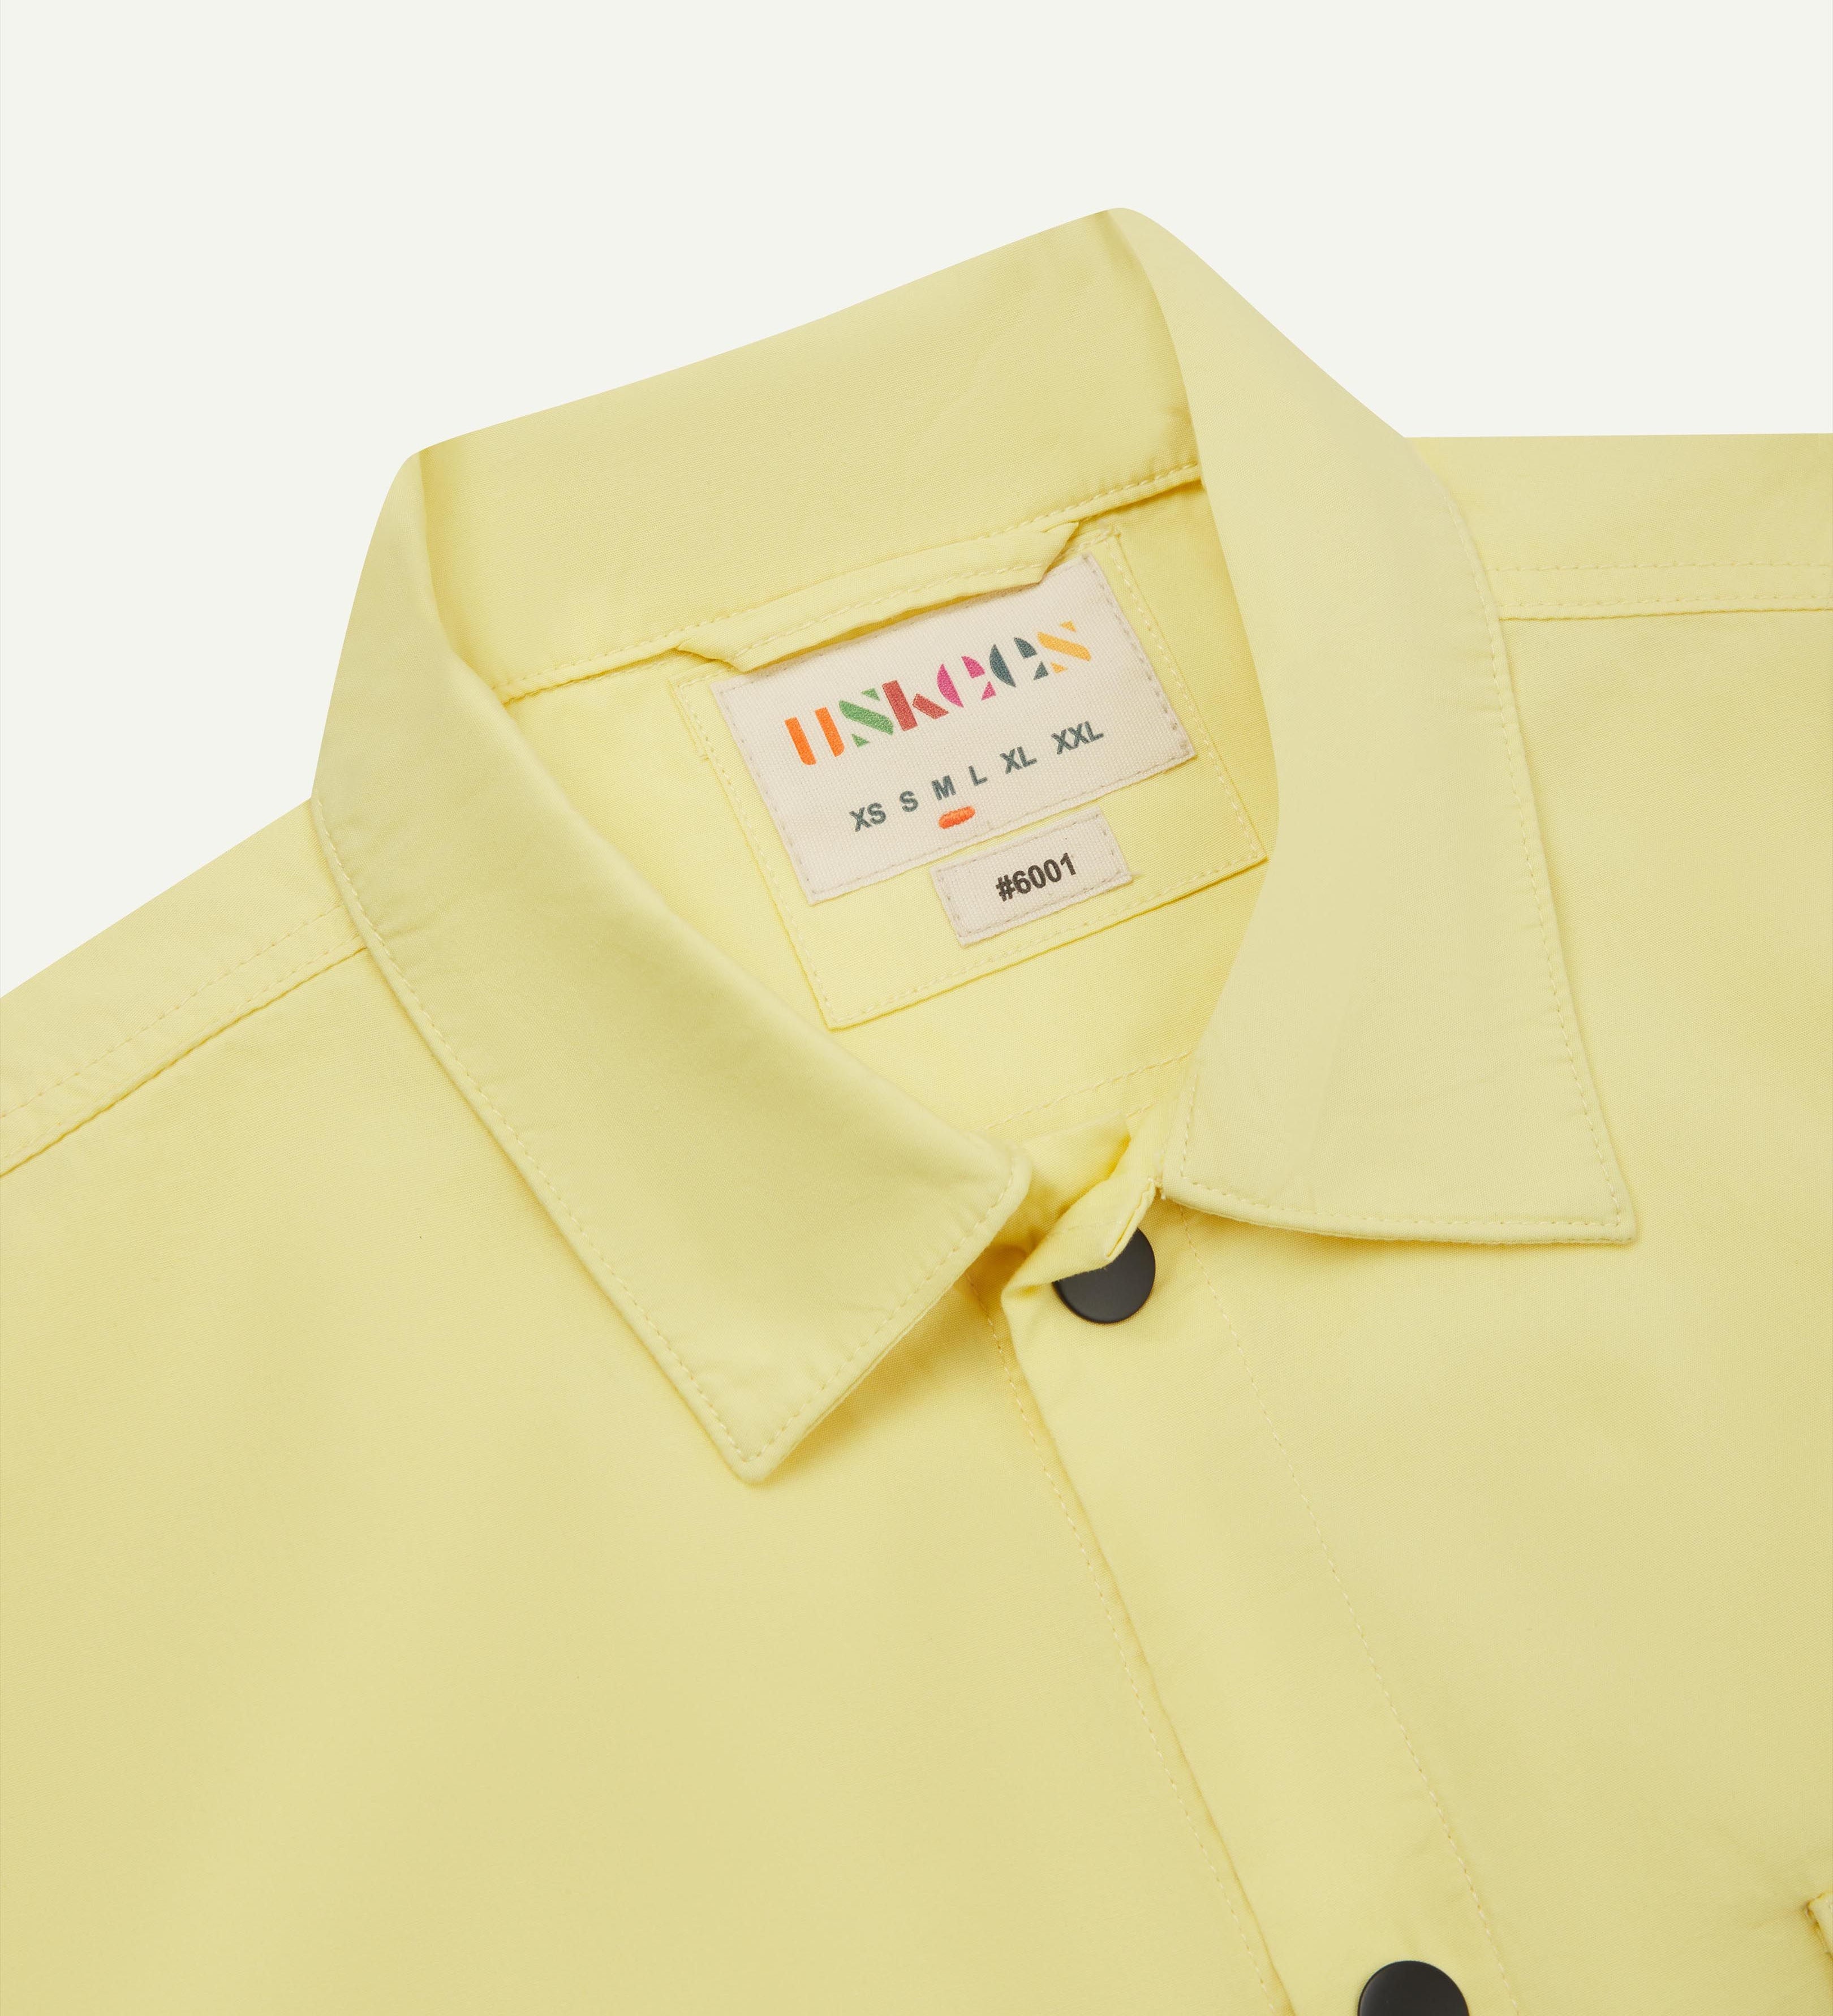 Front close-view of pale yellow buttoned lightweight overshirt from Uskees, showing black press studs and neck label